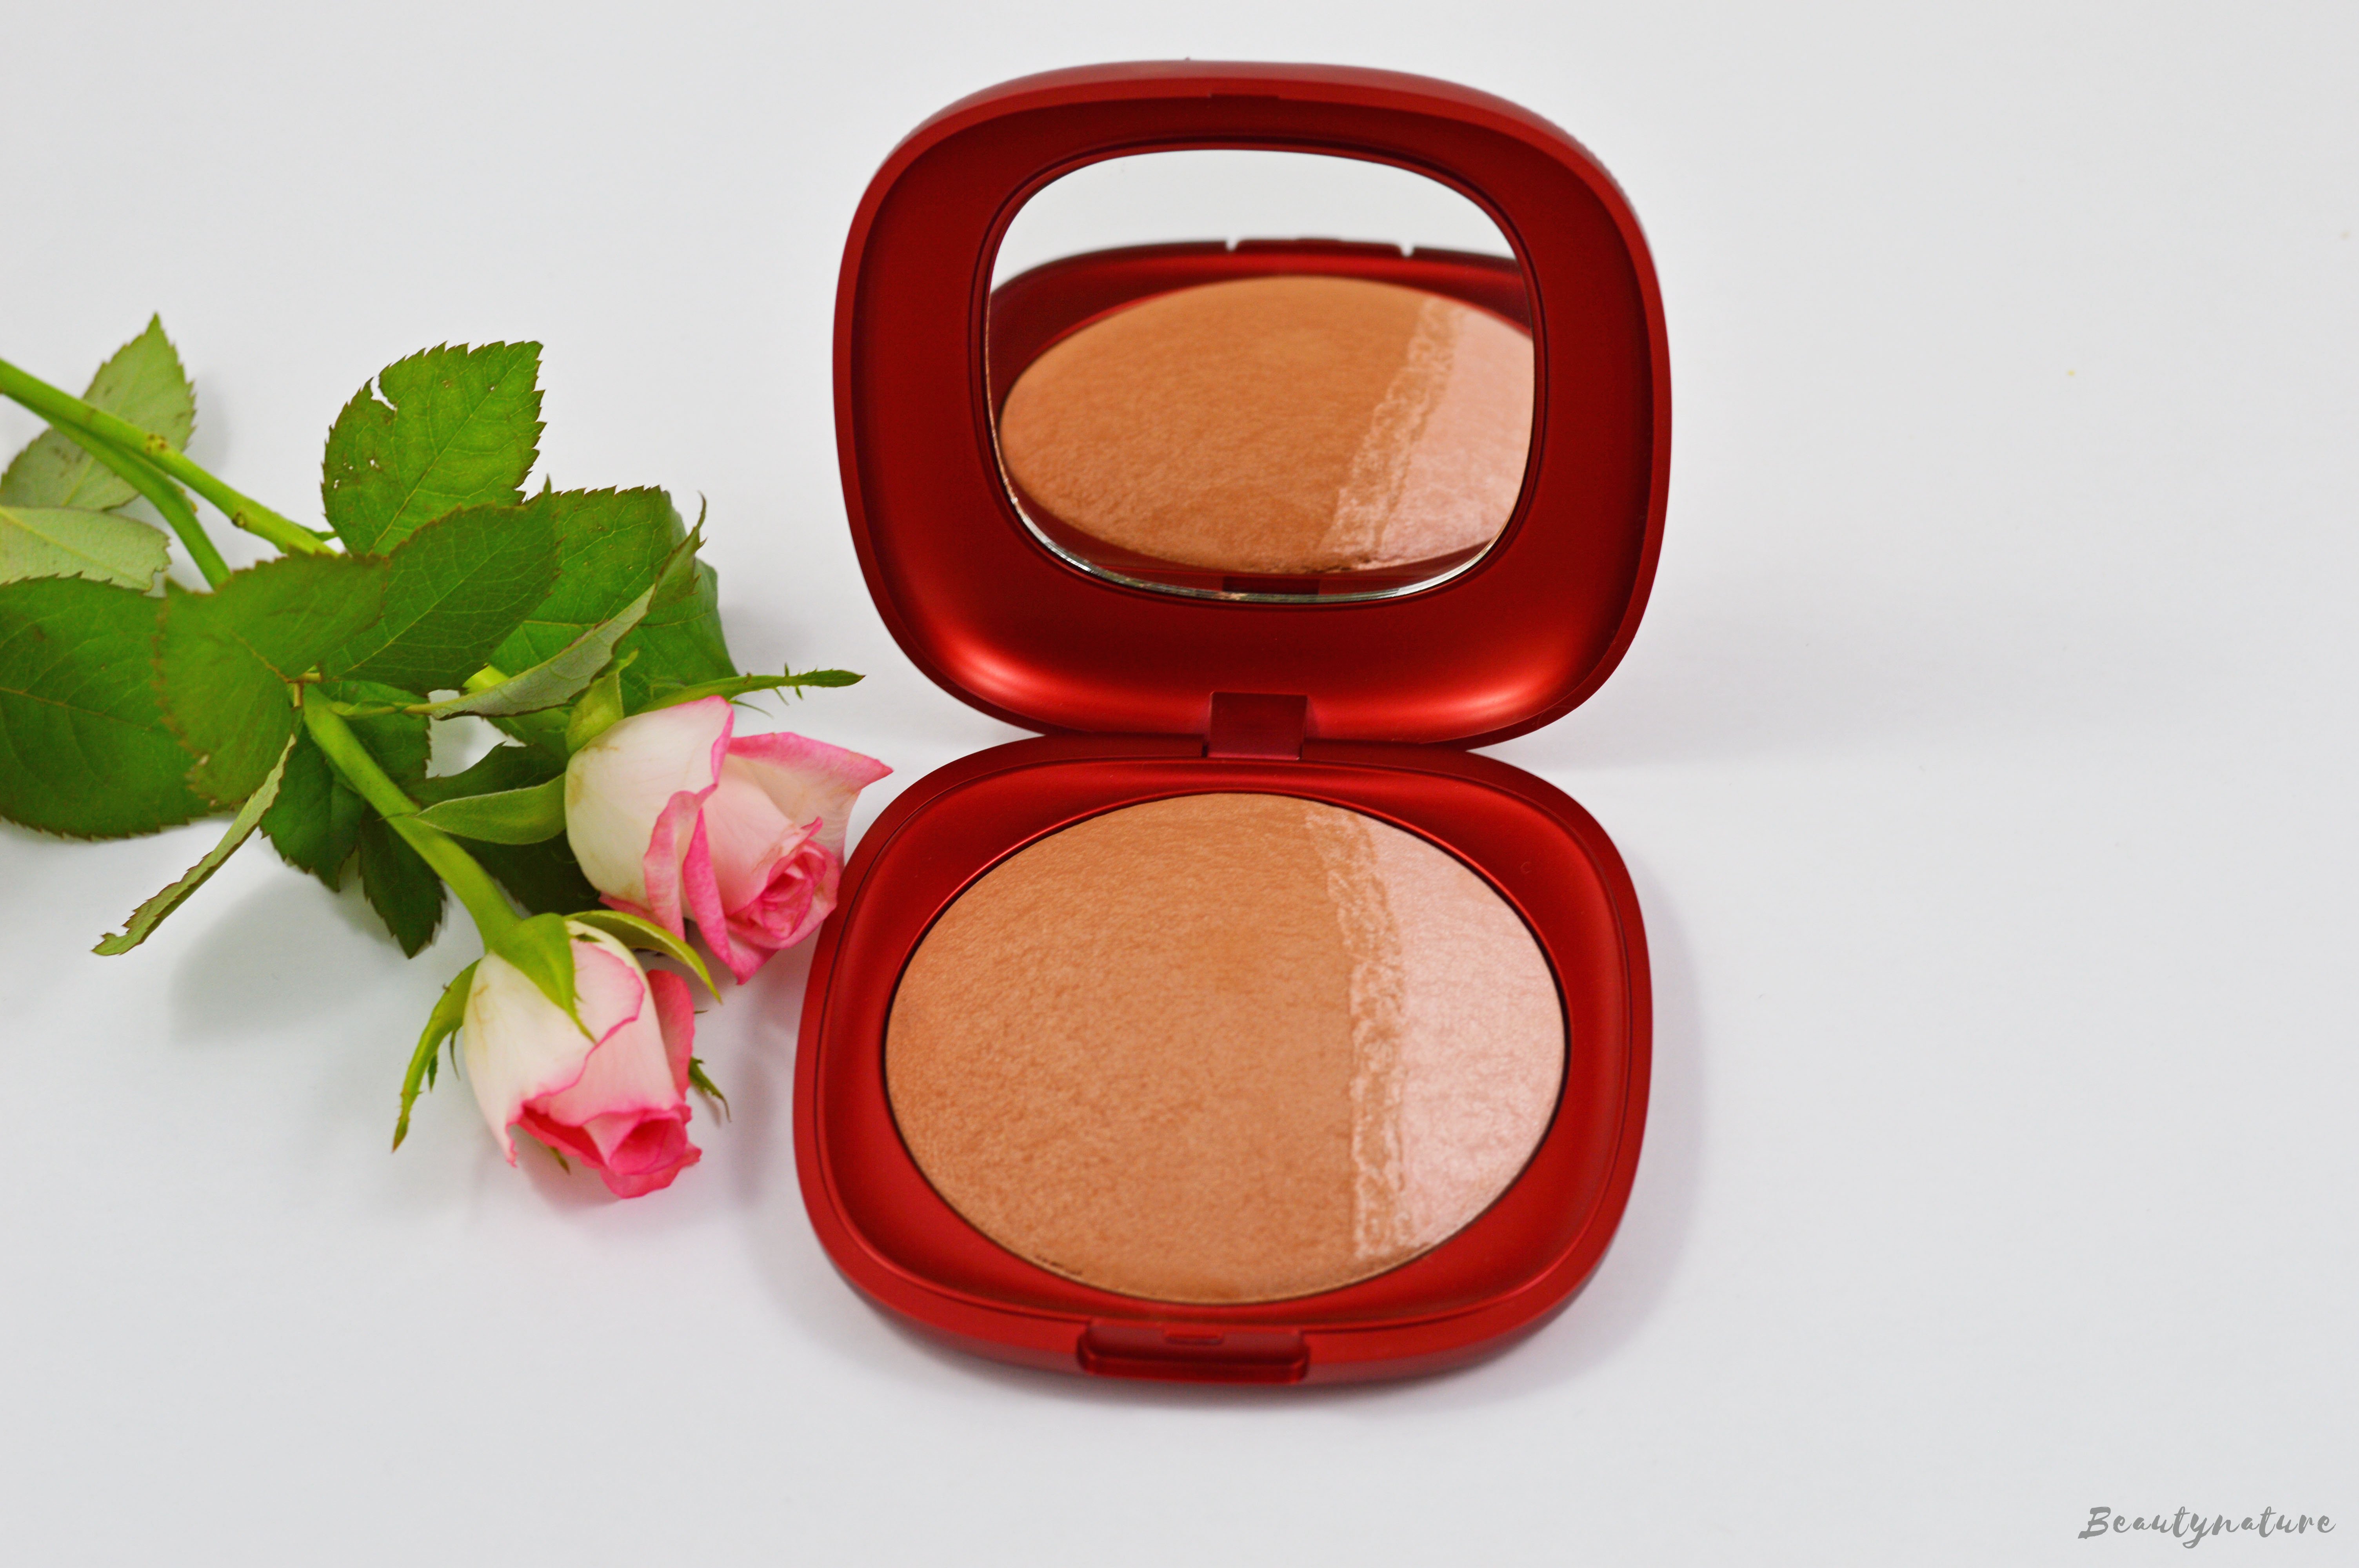 Kiko Milano Holiday Collection 2-IN-1 BRONZER & HIGHLIGHTER